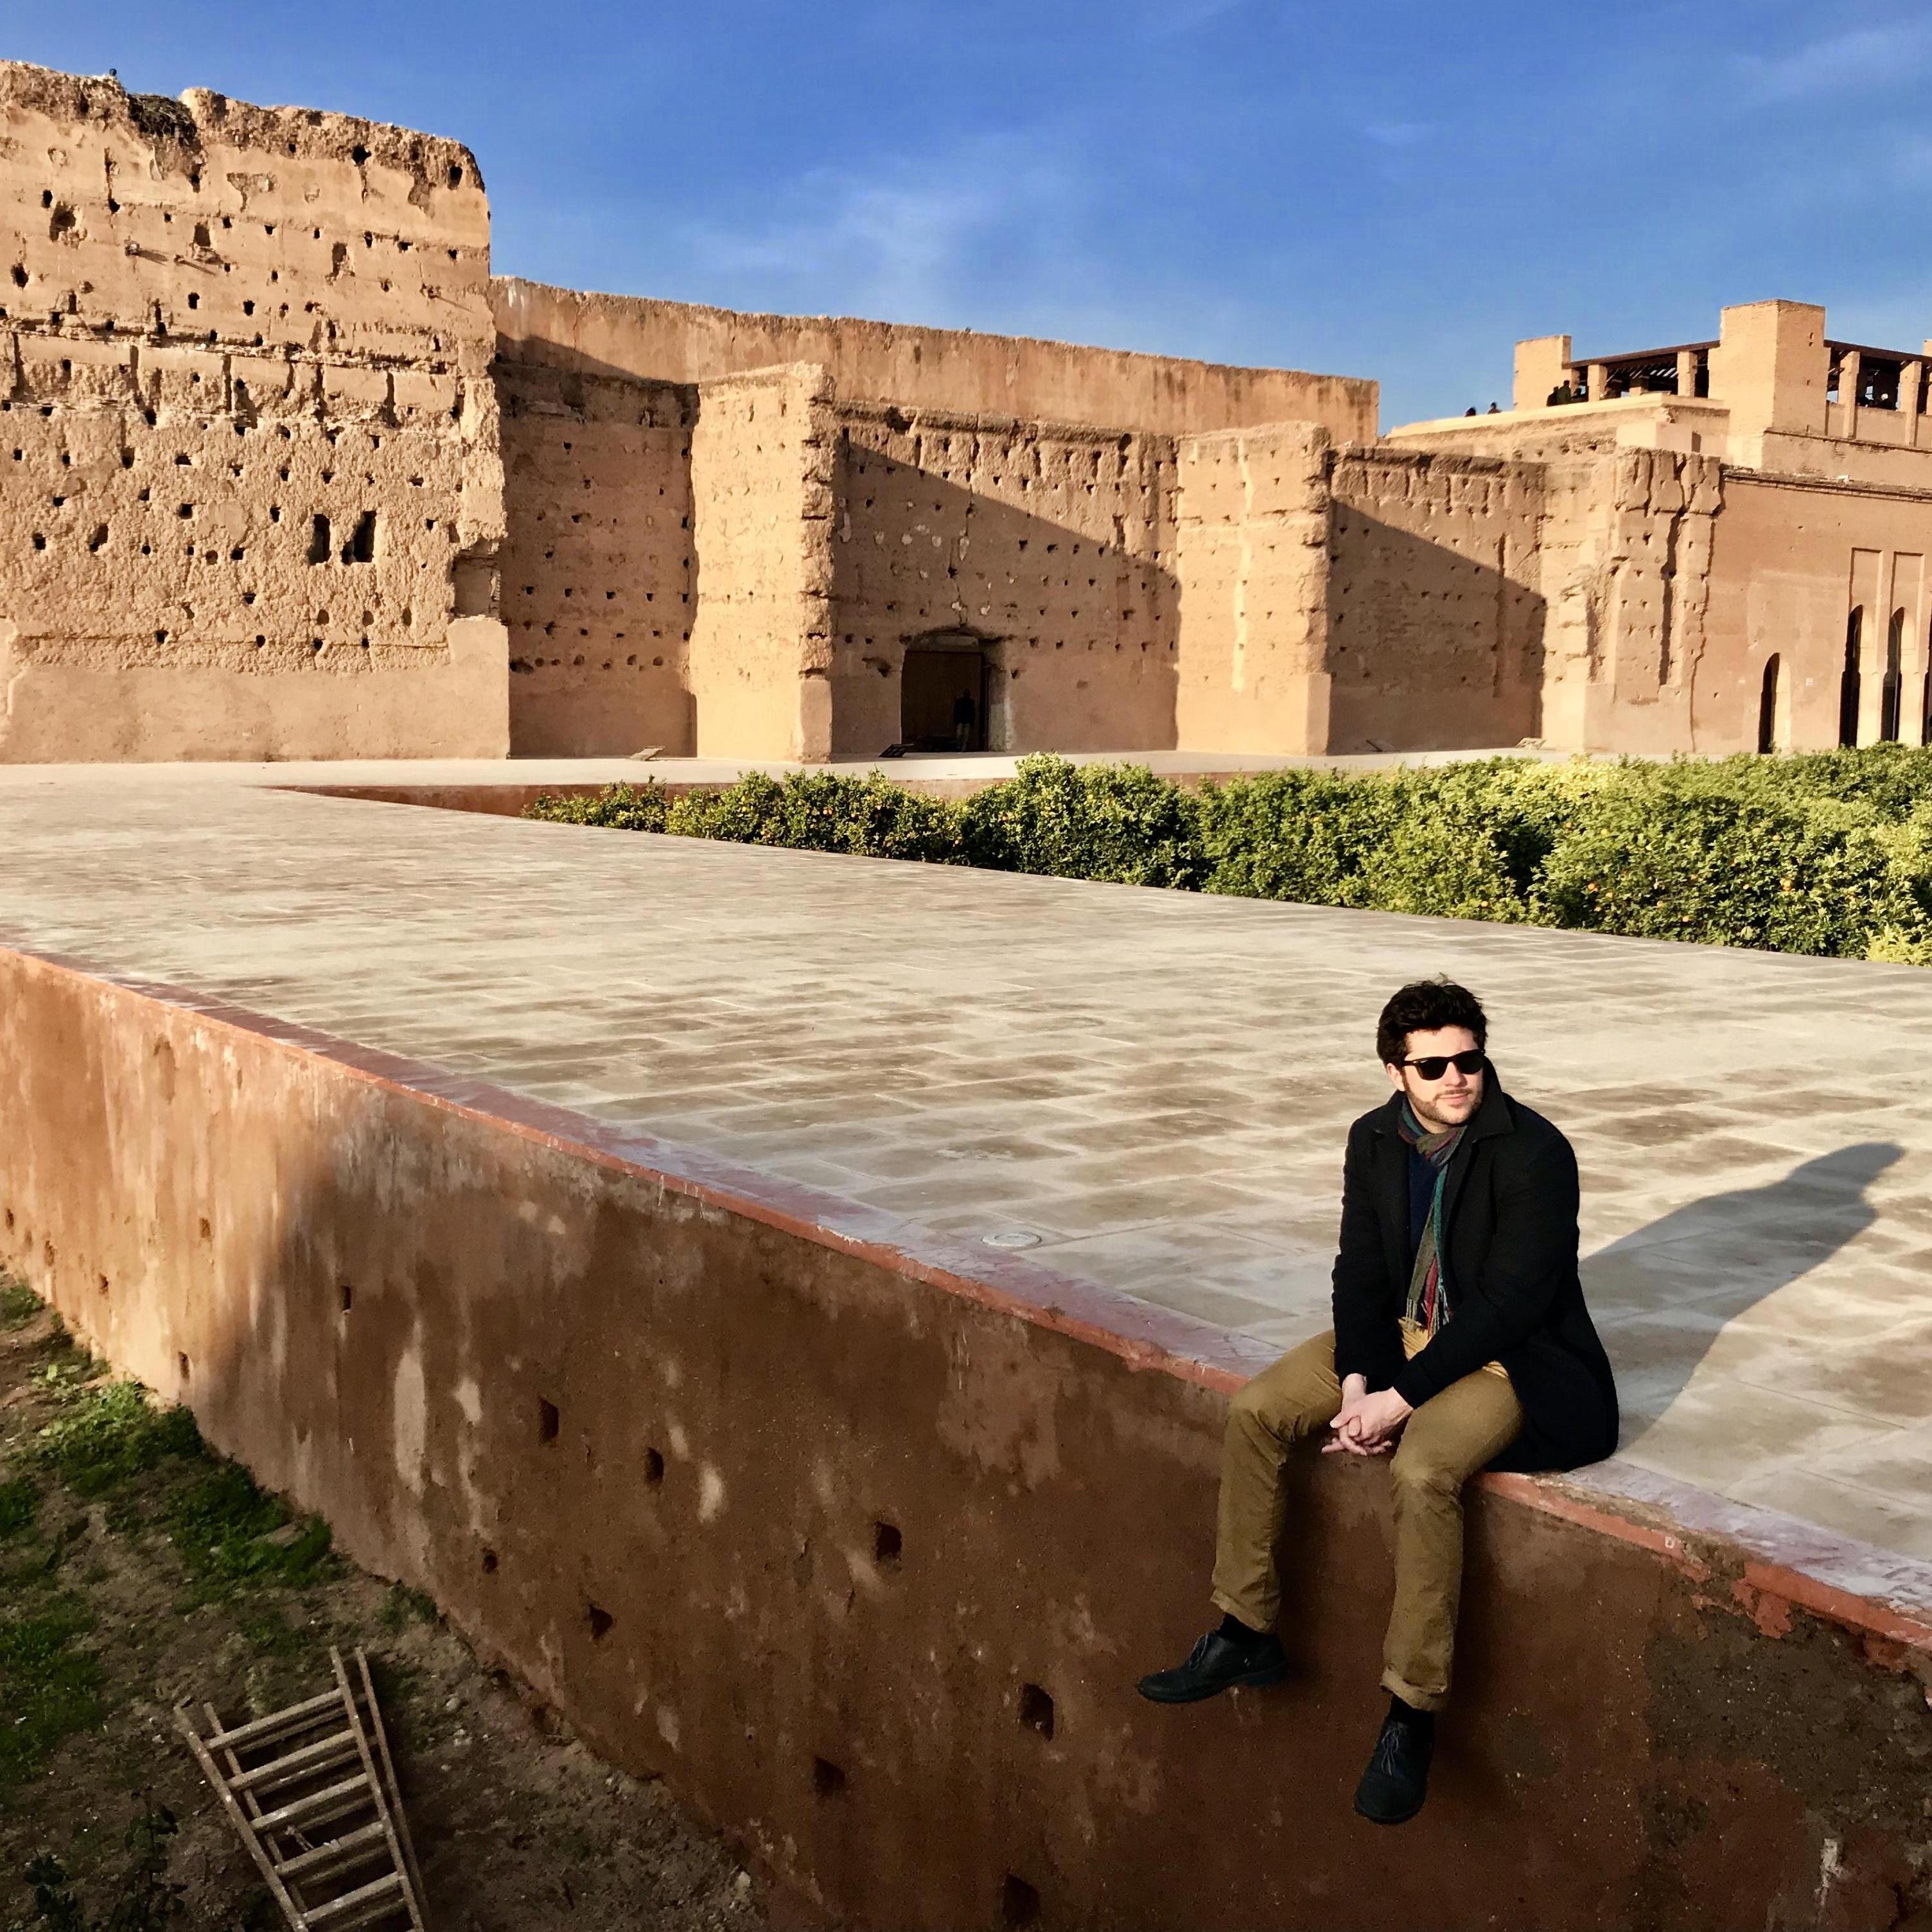 Sitting in the ruins of Marrakech's Badi Palace
2018